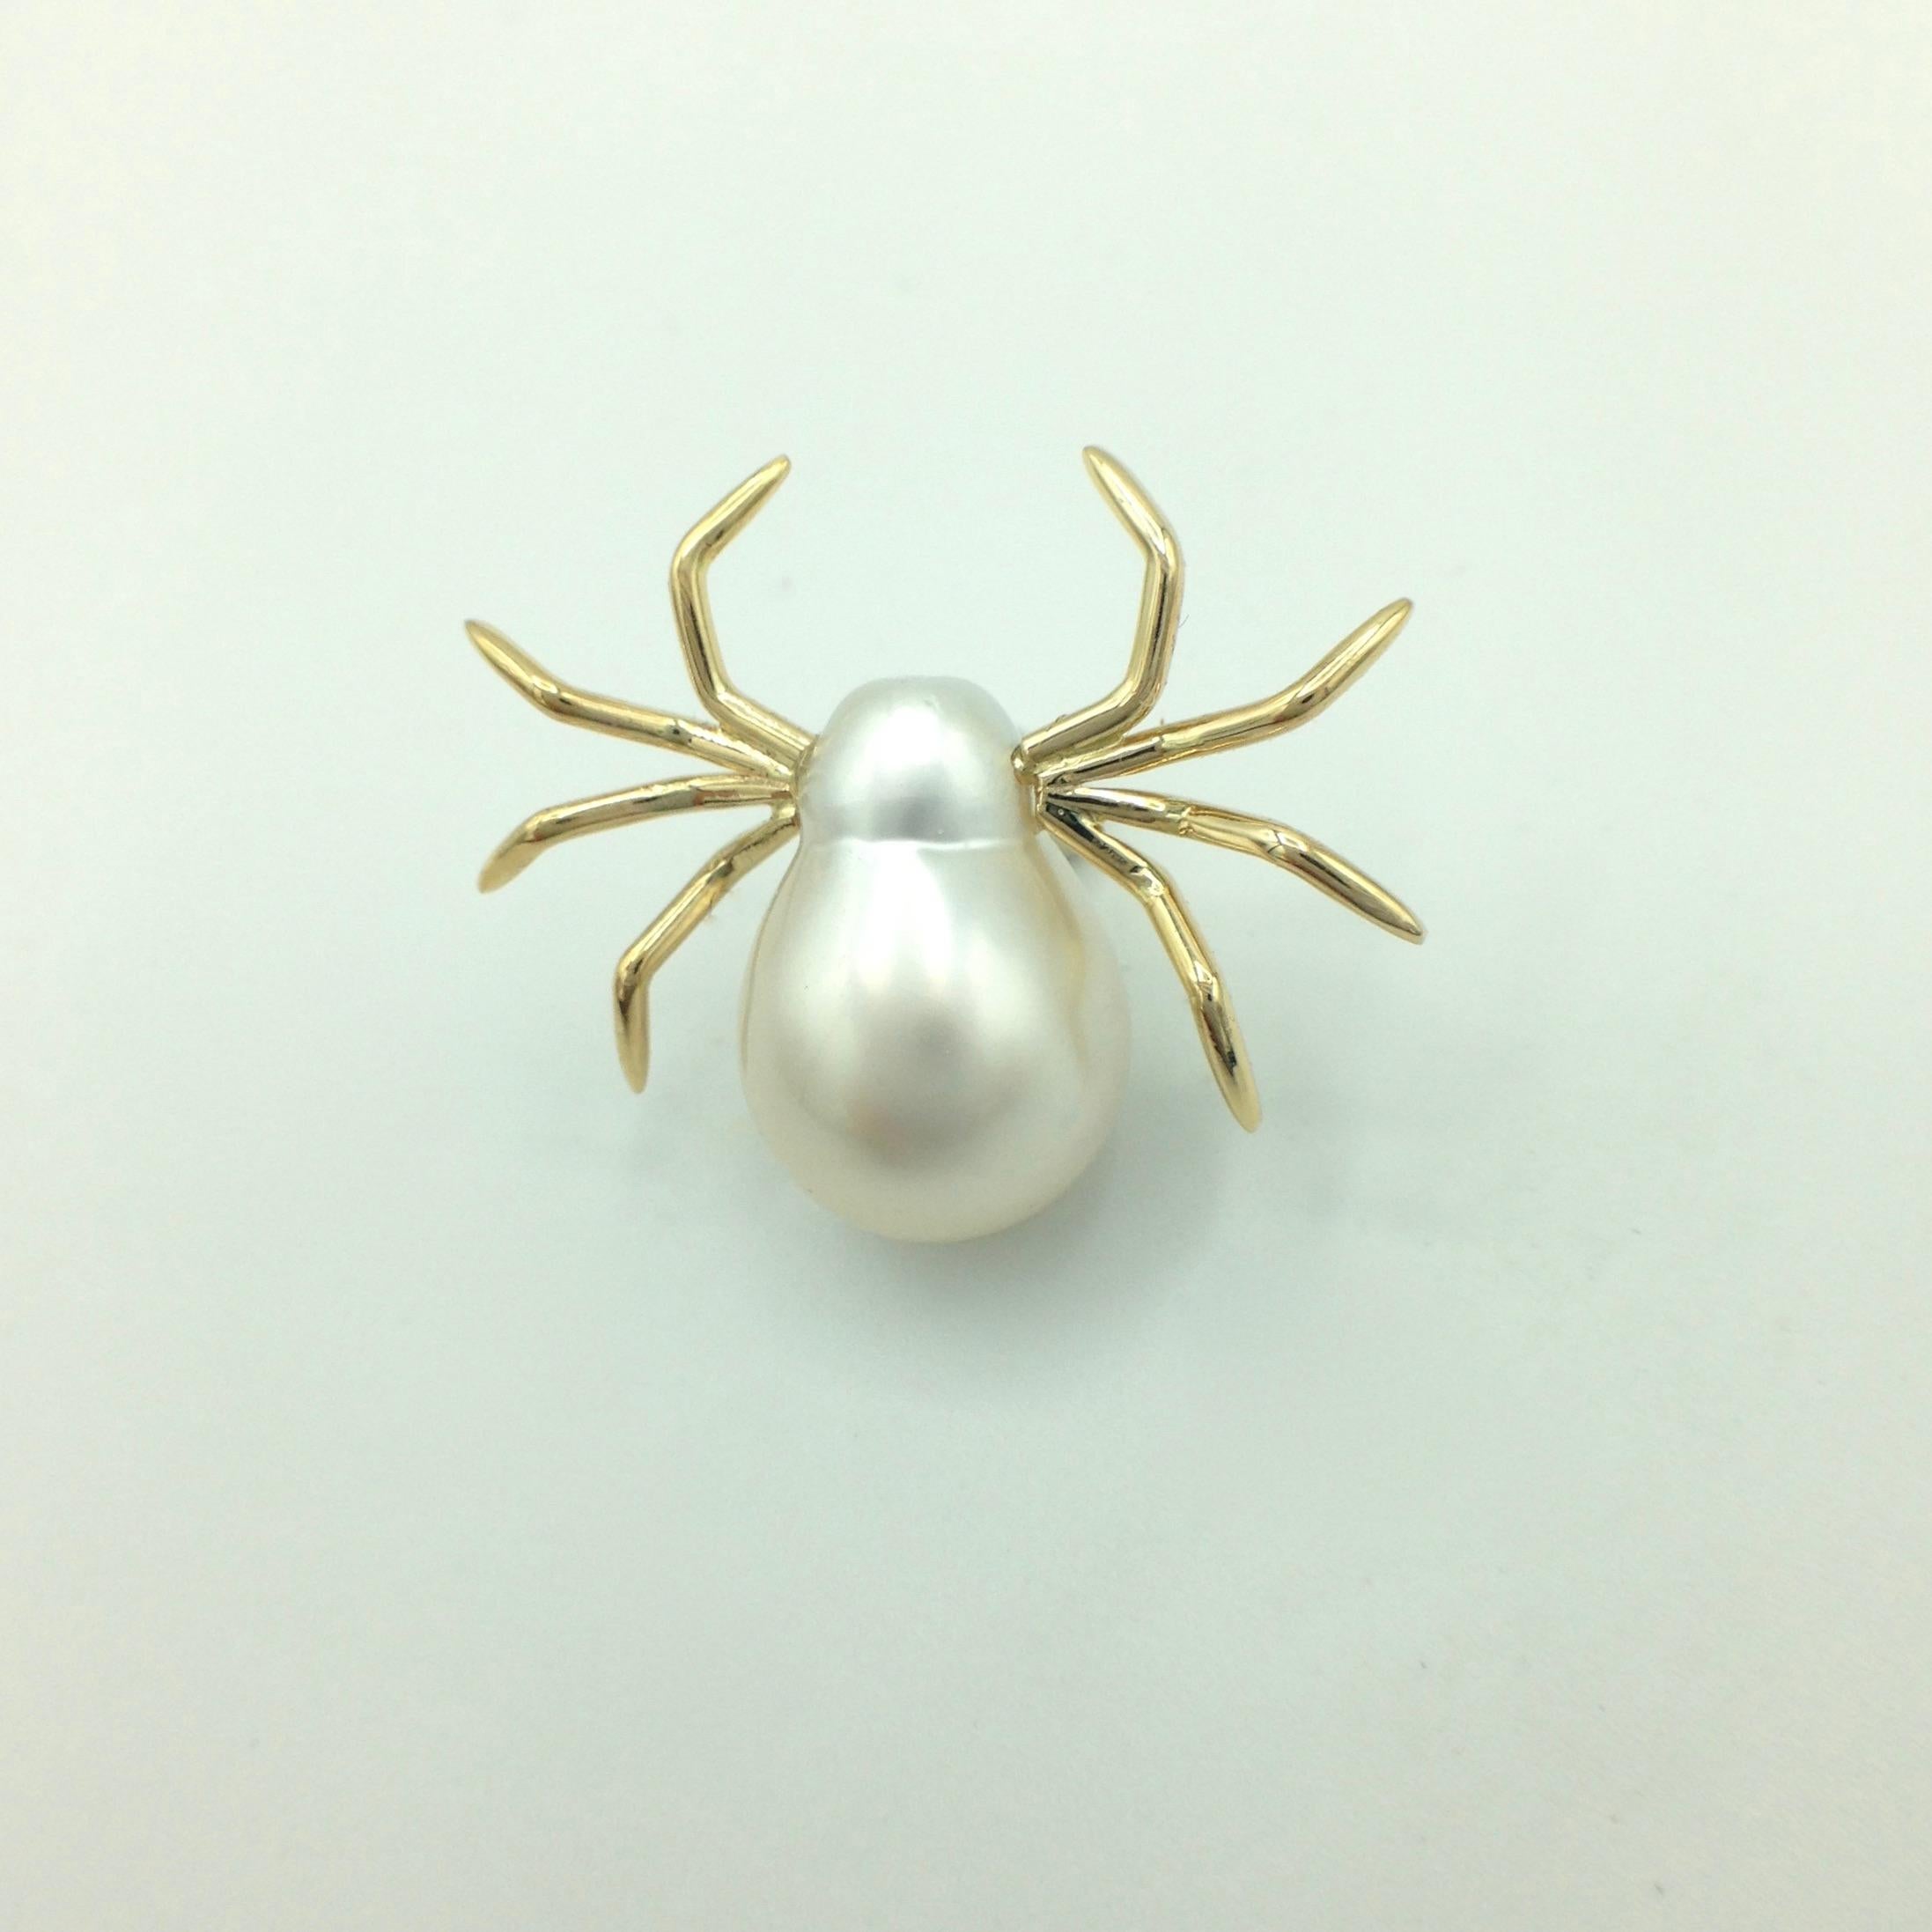 18 Karat Gold Pearl Pin Spider Made in Italy
I use a little Australian pearl to create a spider brooch.
It's a nice jacket brooch, suitable for both men and women
The pearl is 15x10 mm.


